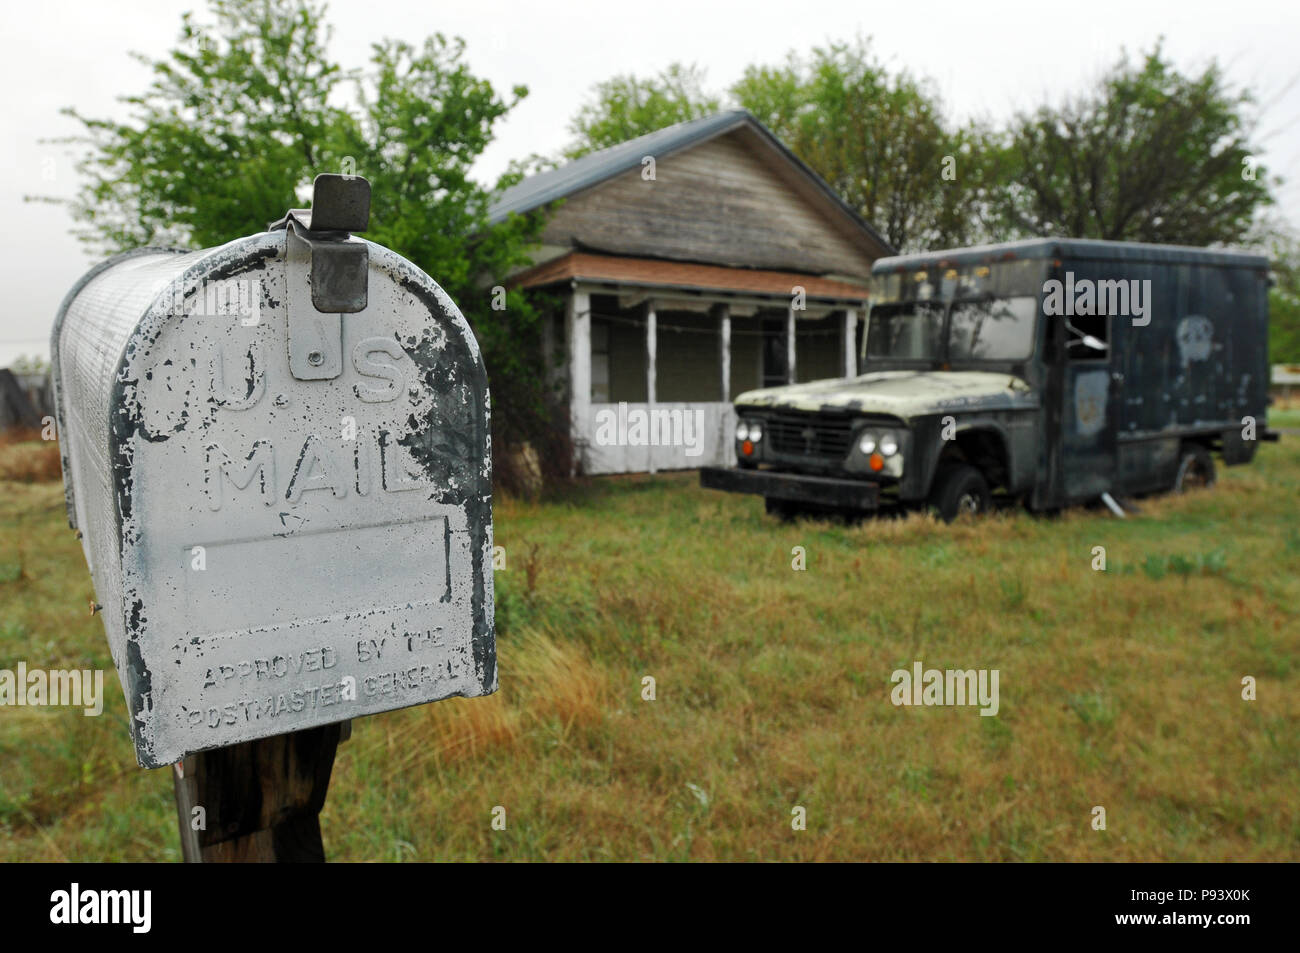 A weathered mailbox stands near an abandoned vehicle and home on a rural property in the Route 66 town of Texola, Oklahoma. Stock Photo